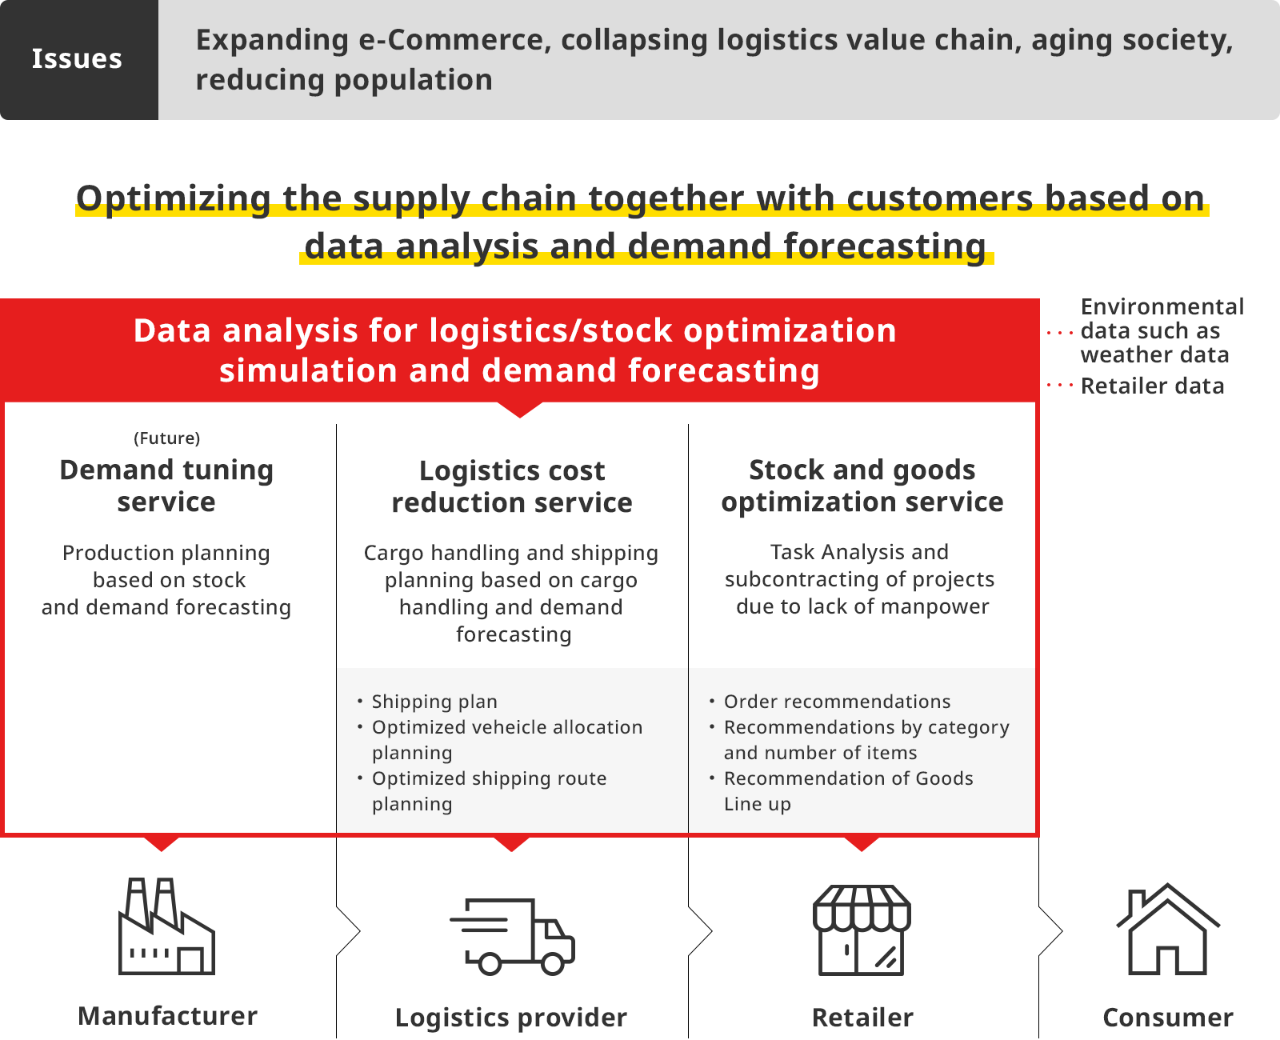 the supply chain optimization by data analysis and demand prediction